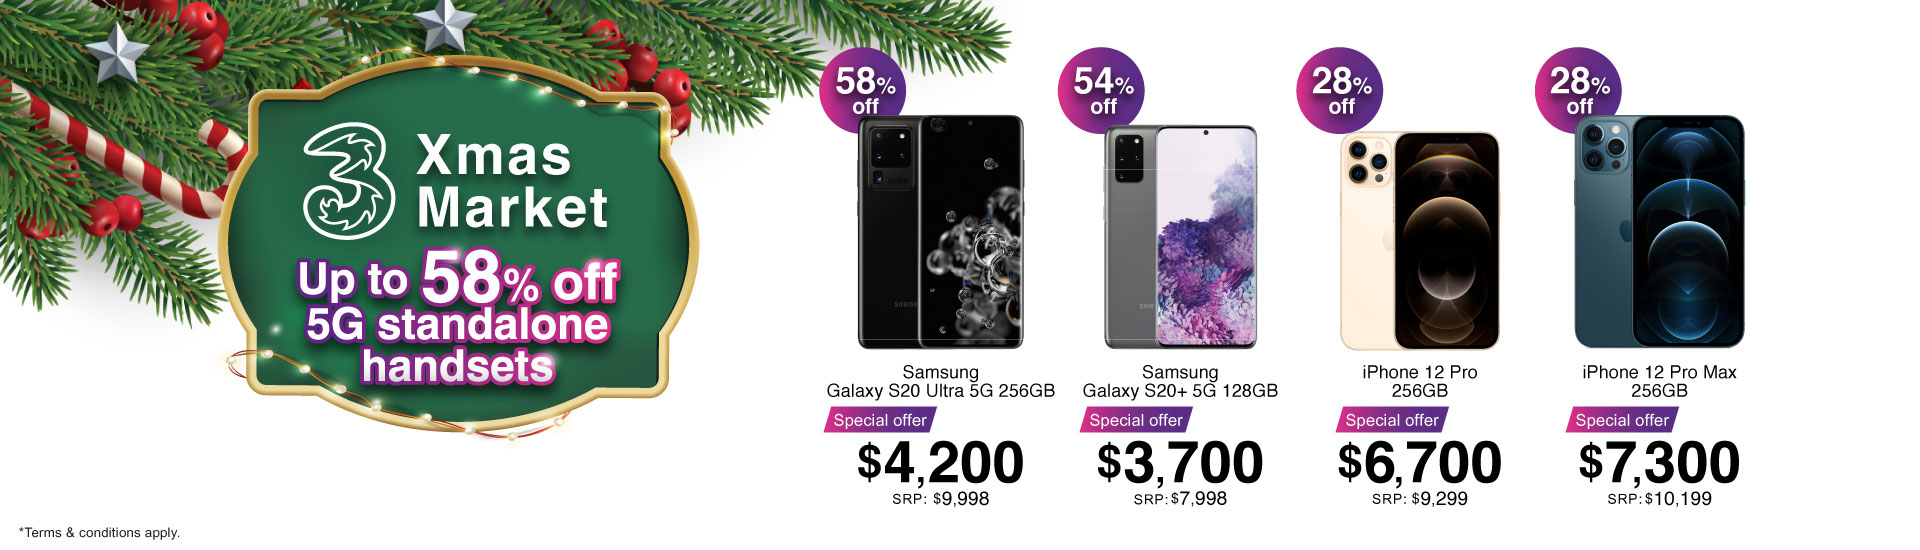 Xmas Market. Up to 58% off 5G standalone handsets.